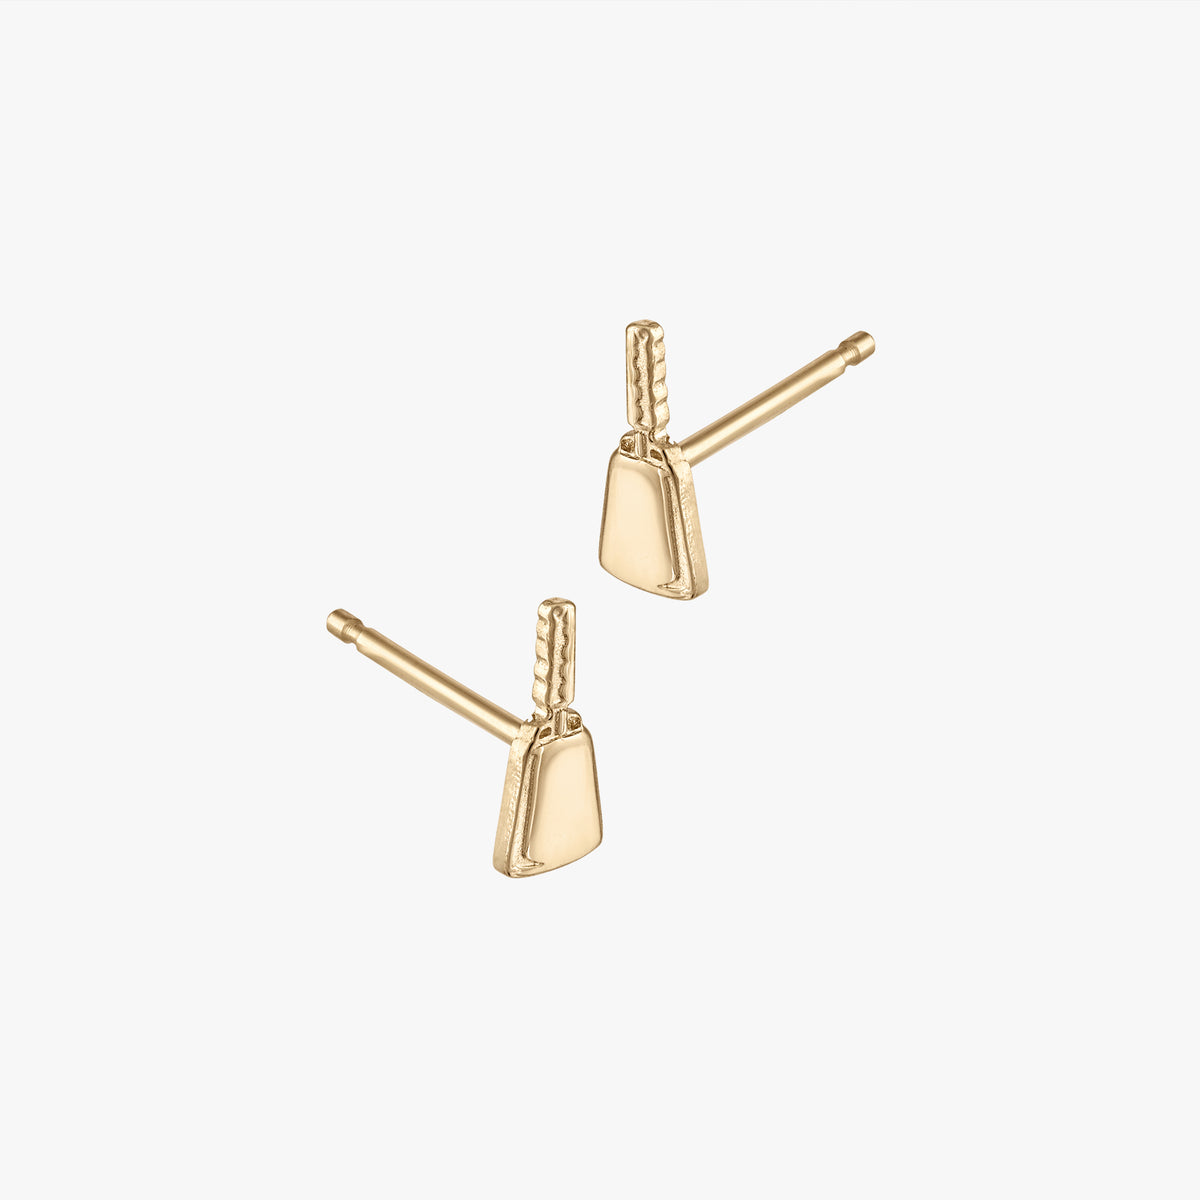 Mississippi State Cowbell Stud Earring